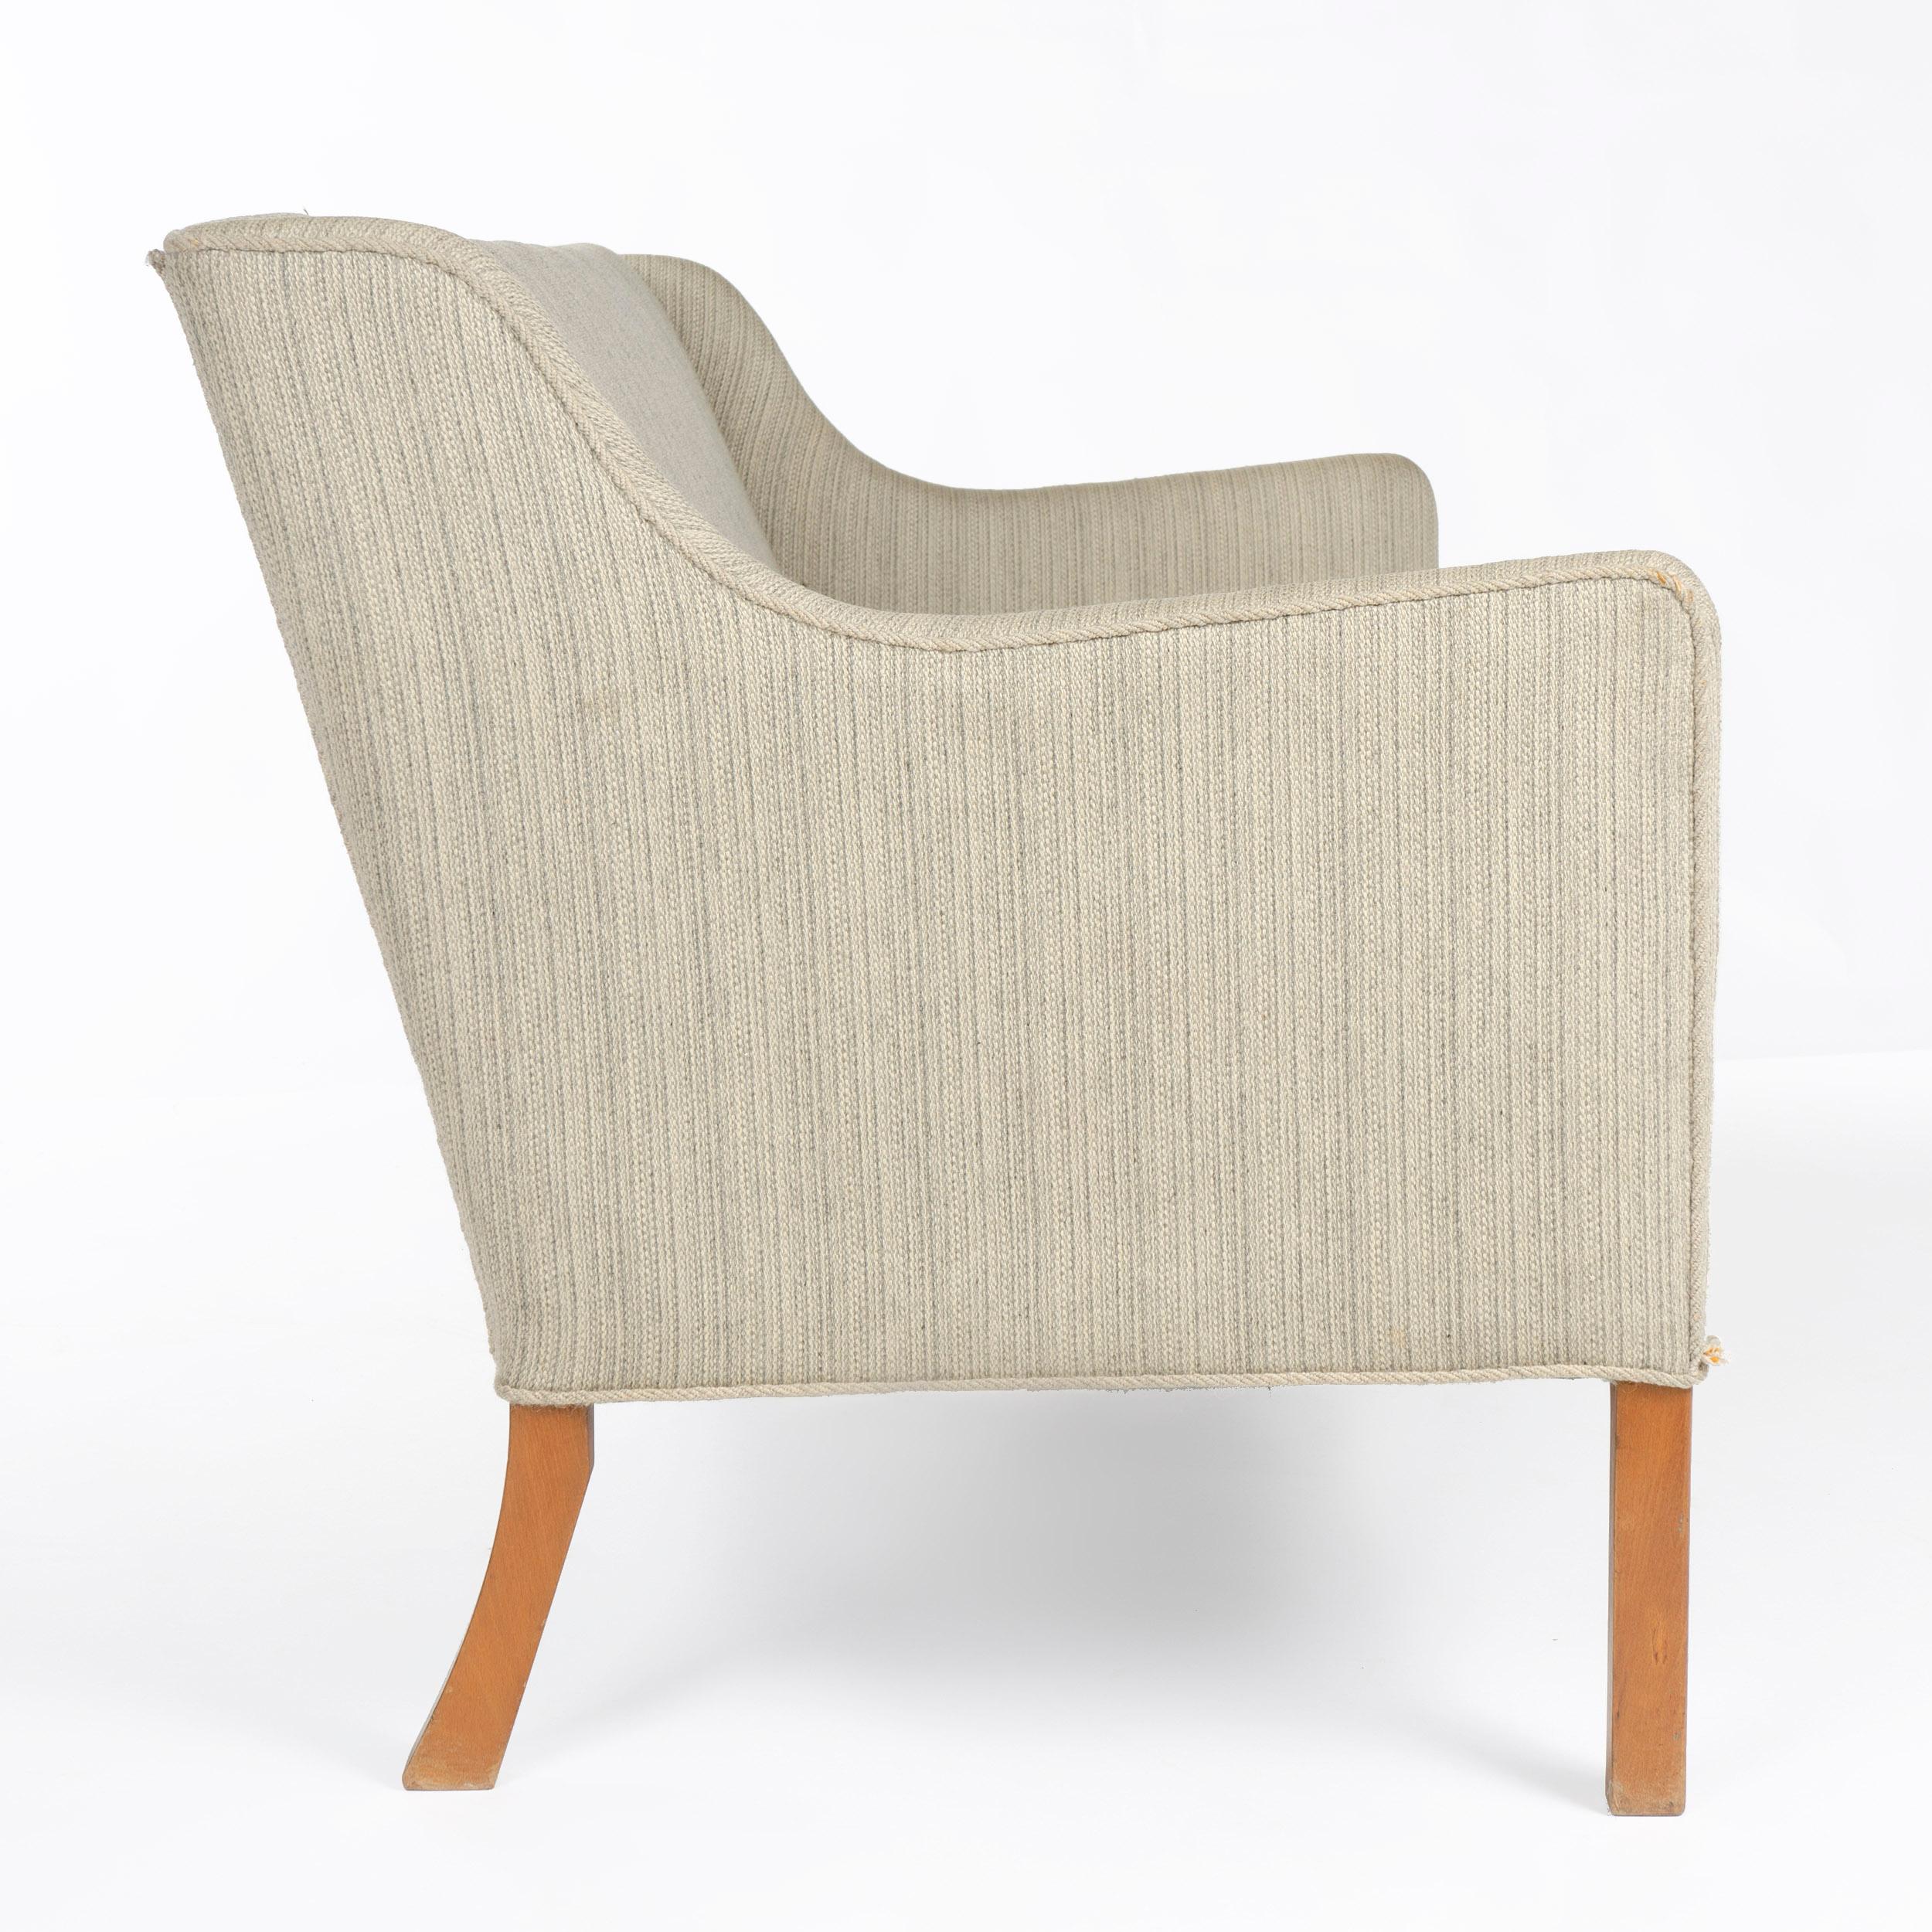 Mid-20th Century 1940s Danish Upholstered Settee by Ole Wanscher for A.J. Iversen